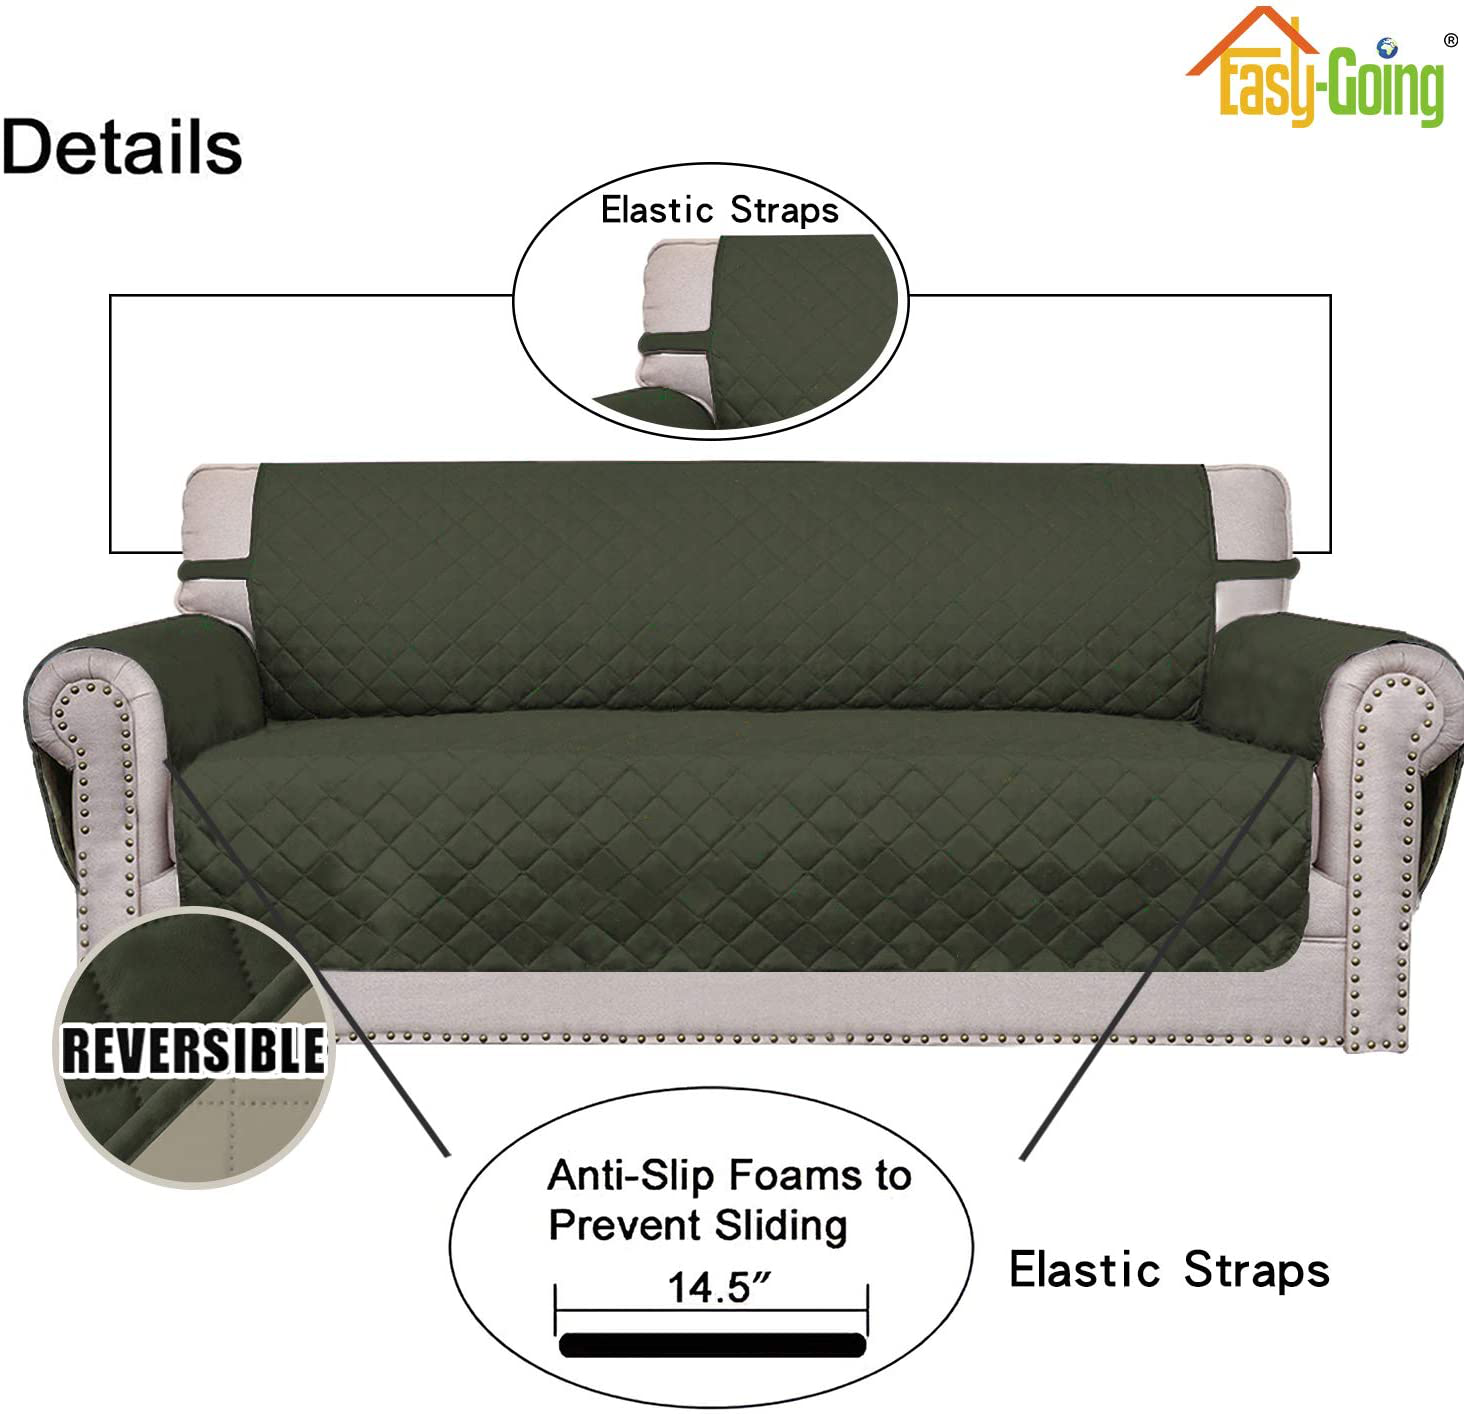 Easy-Going 4 Seater Sofa Slipcover Reversible Sofa Cover Water Resistant Couch Cover with Foam Sticks Elastic Straps Furniture Protector for Pets Kids Children Dog Cat(XX-Large, Ivory/Ivory)